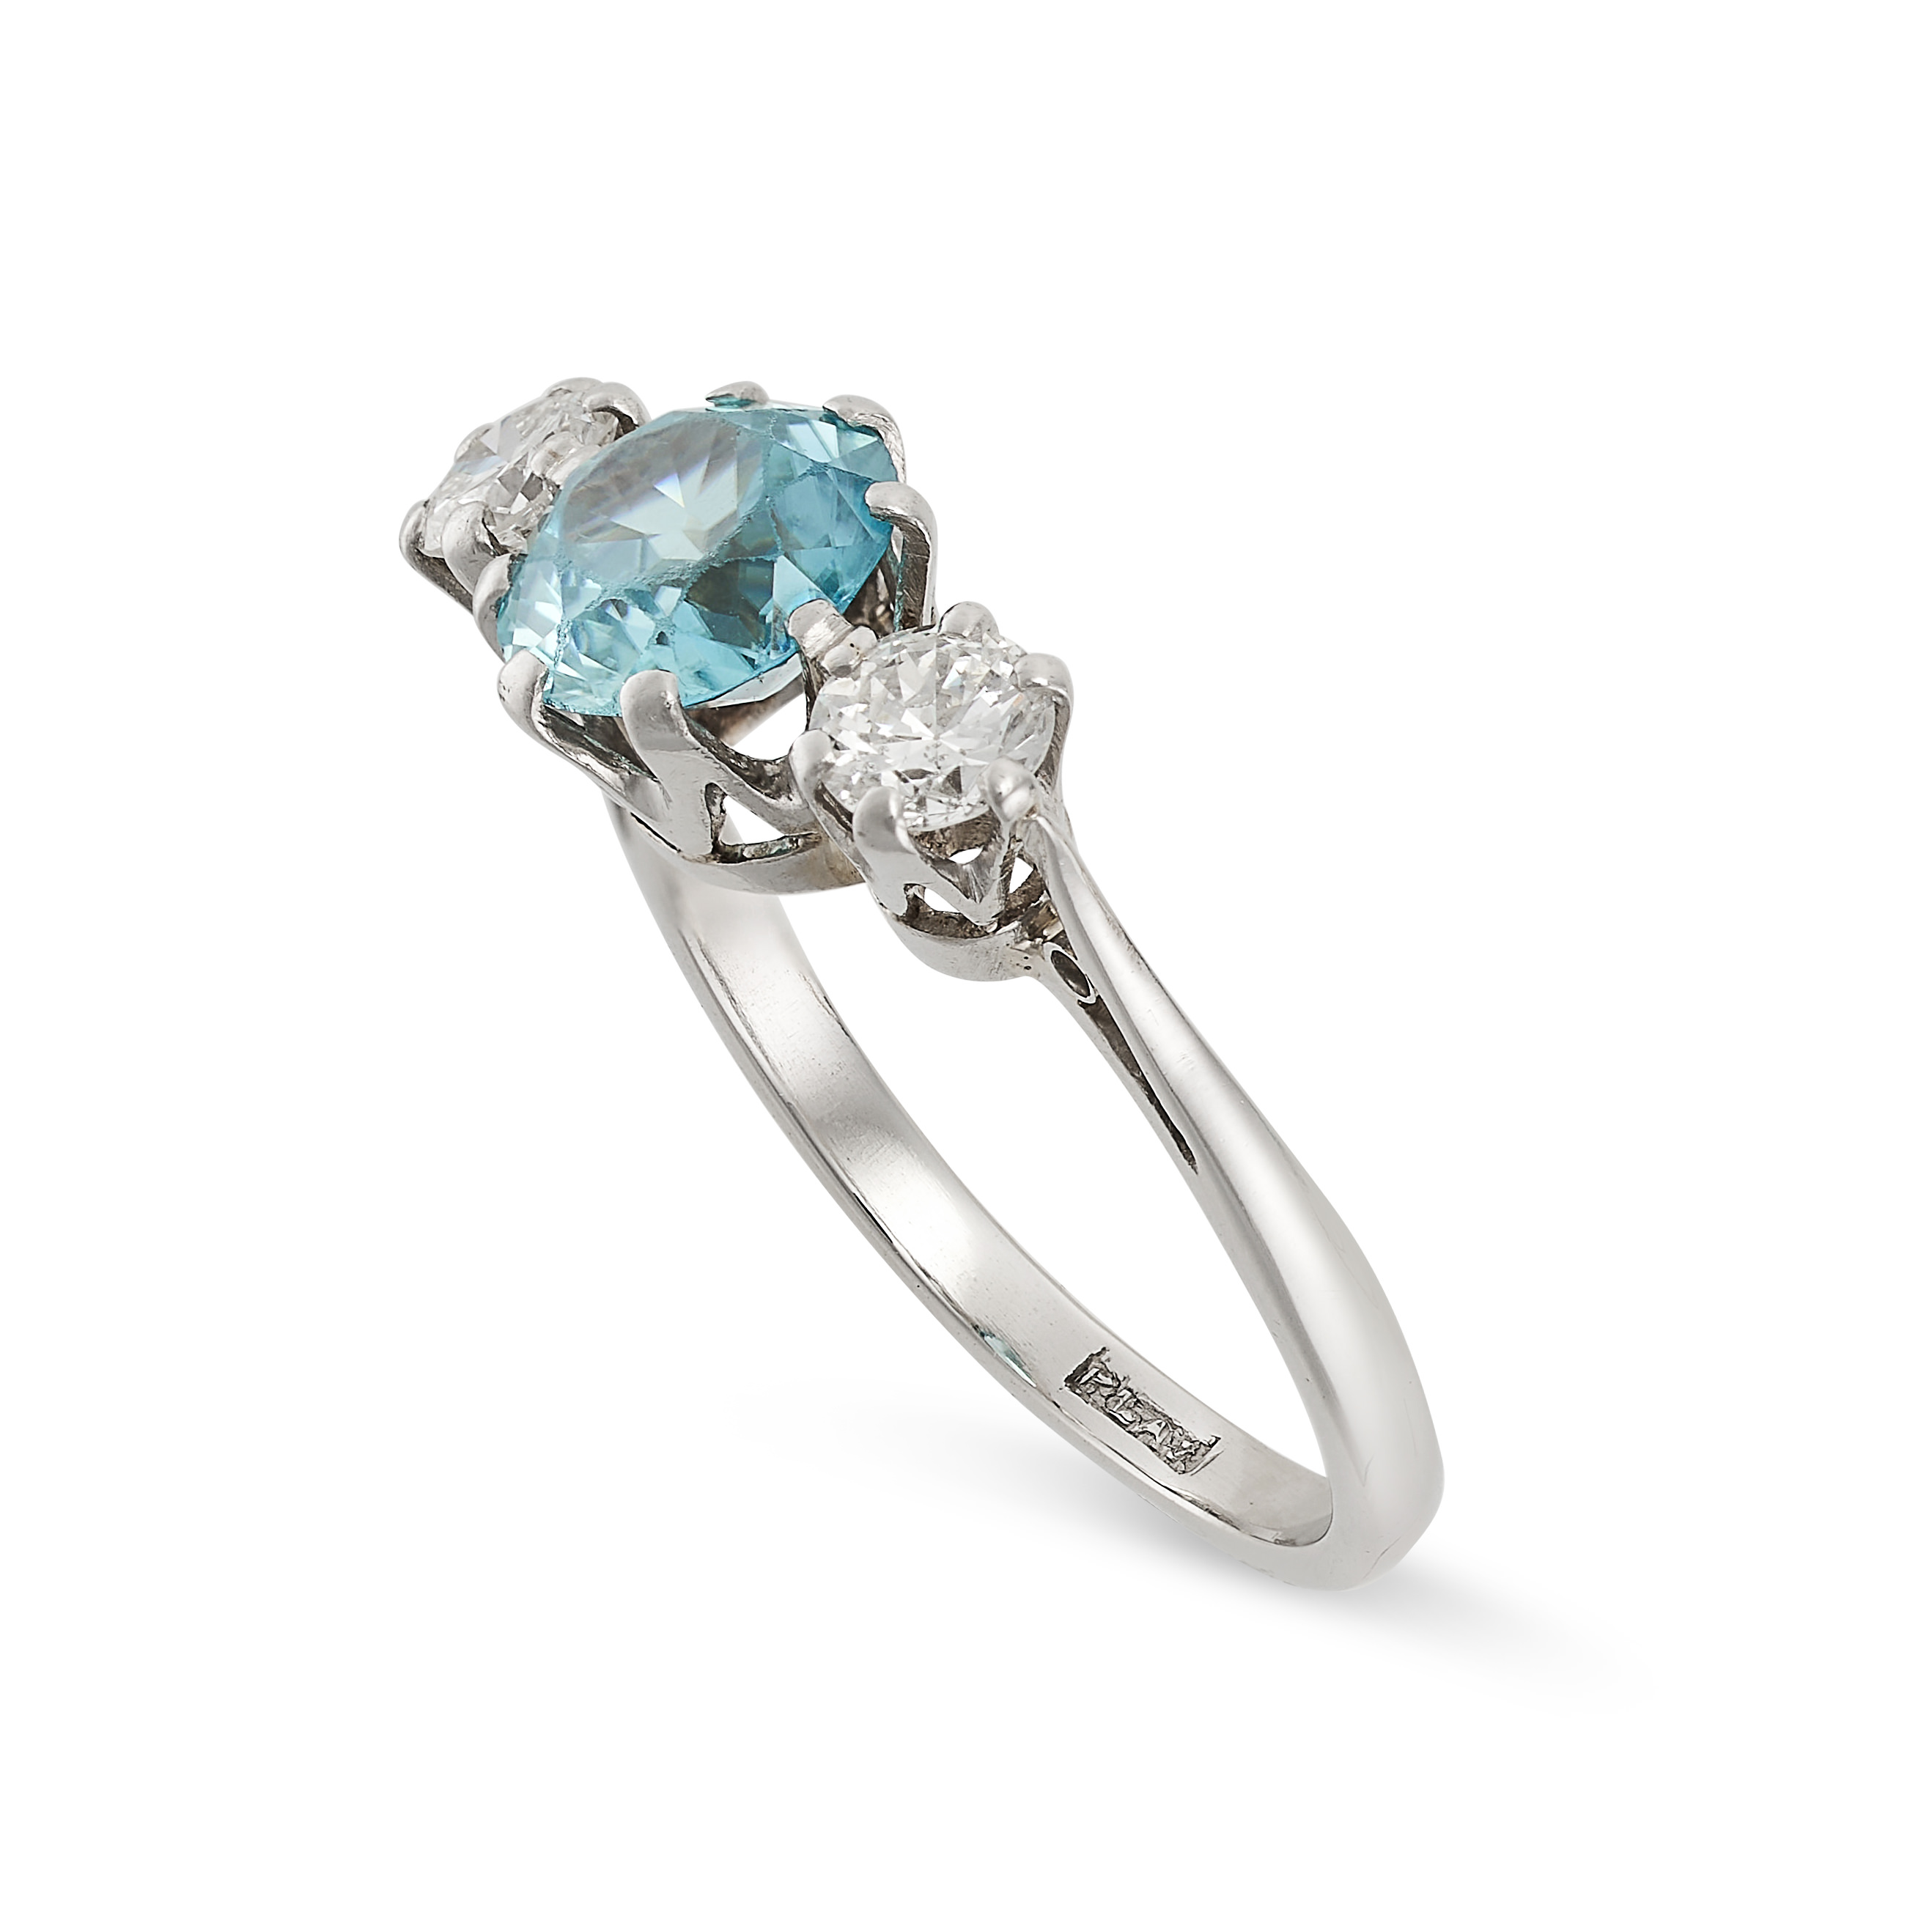 A BLUE ZIRCON AND DIAMOND THREE STONE RING set with a round cut blue zircon between two round cut - Image 2 of 2